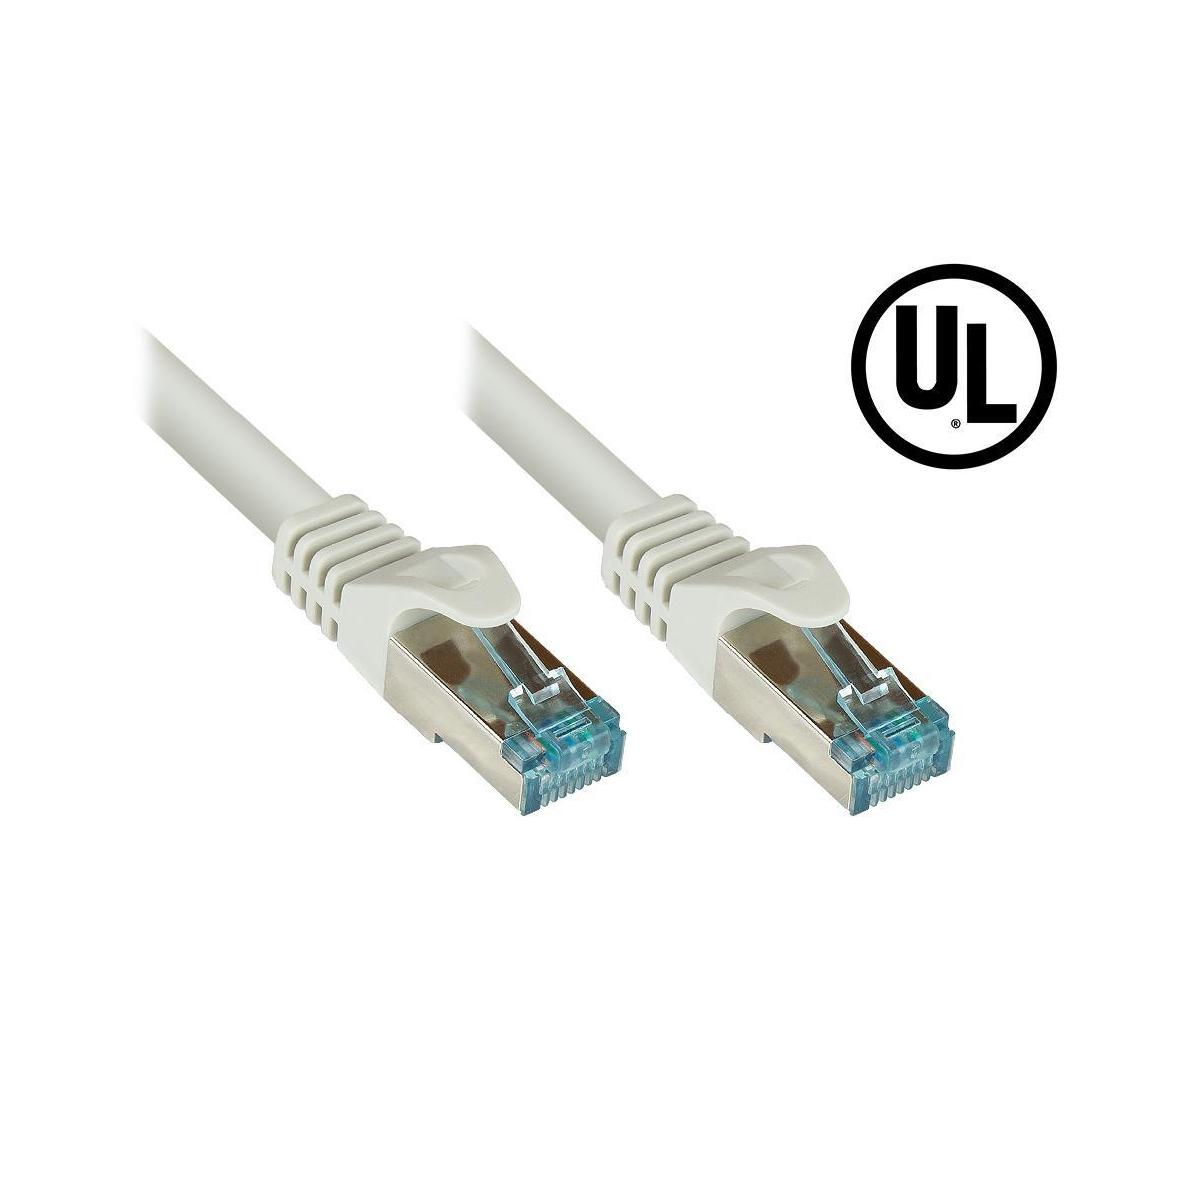 VARIA GROUP 8064-H003 Patchcable Cat.6a, Grau